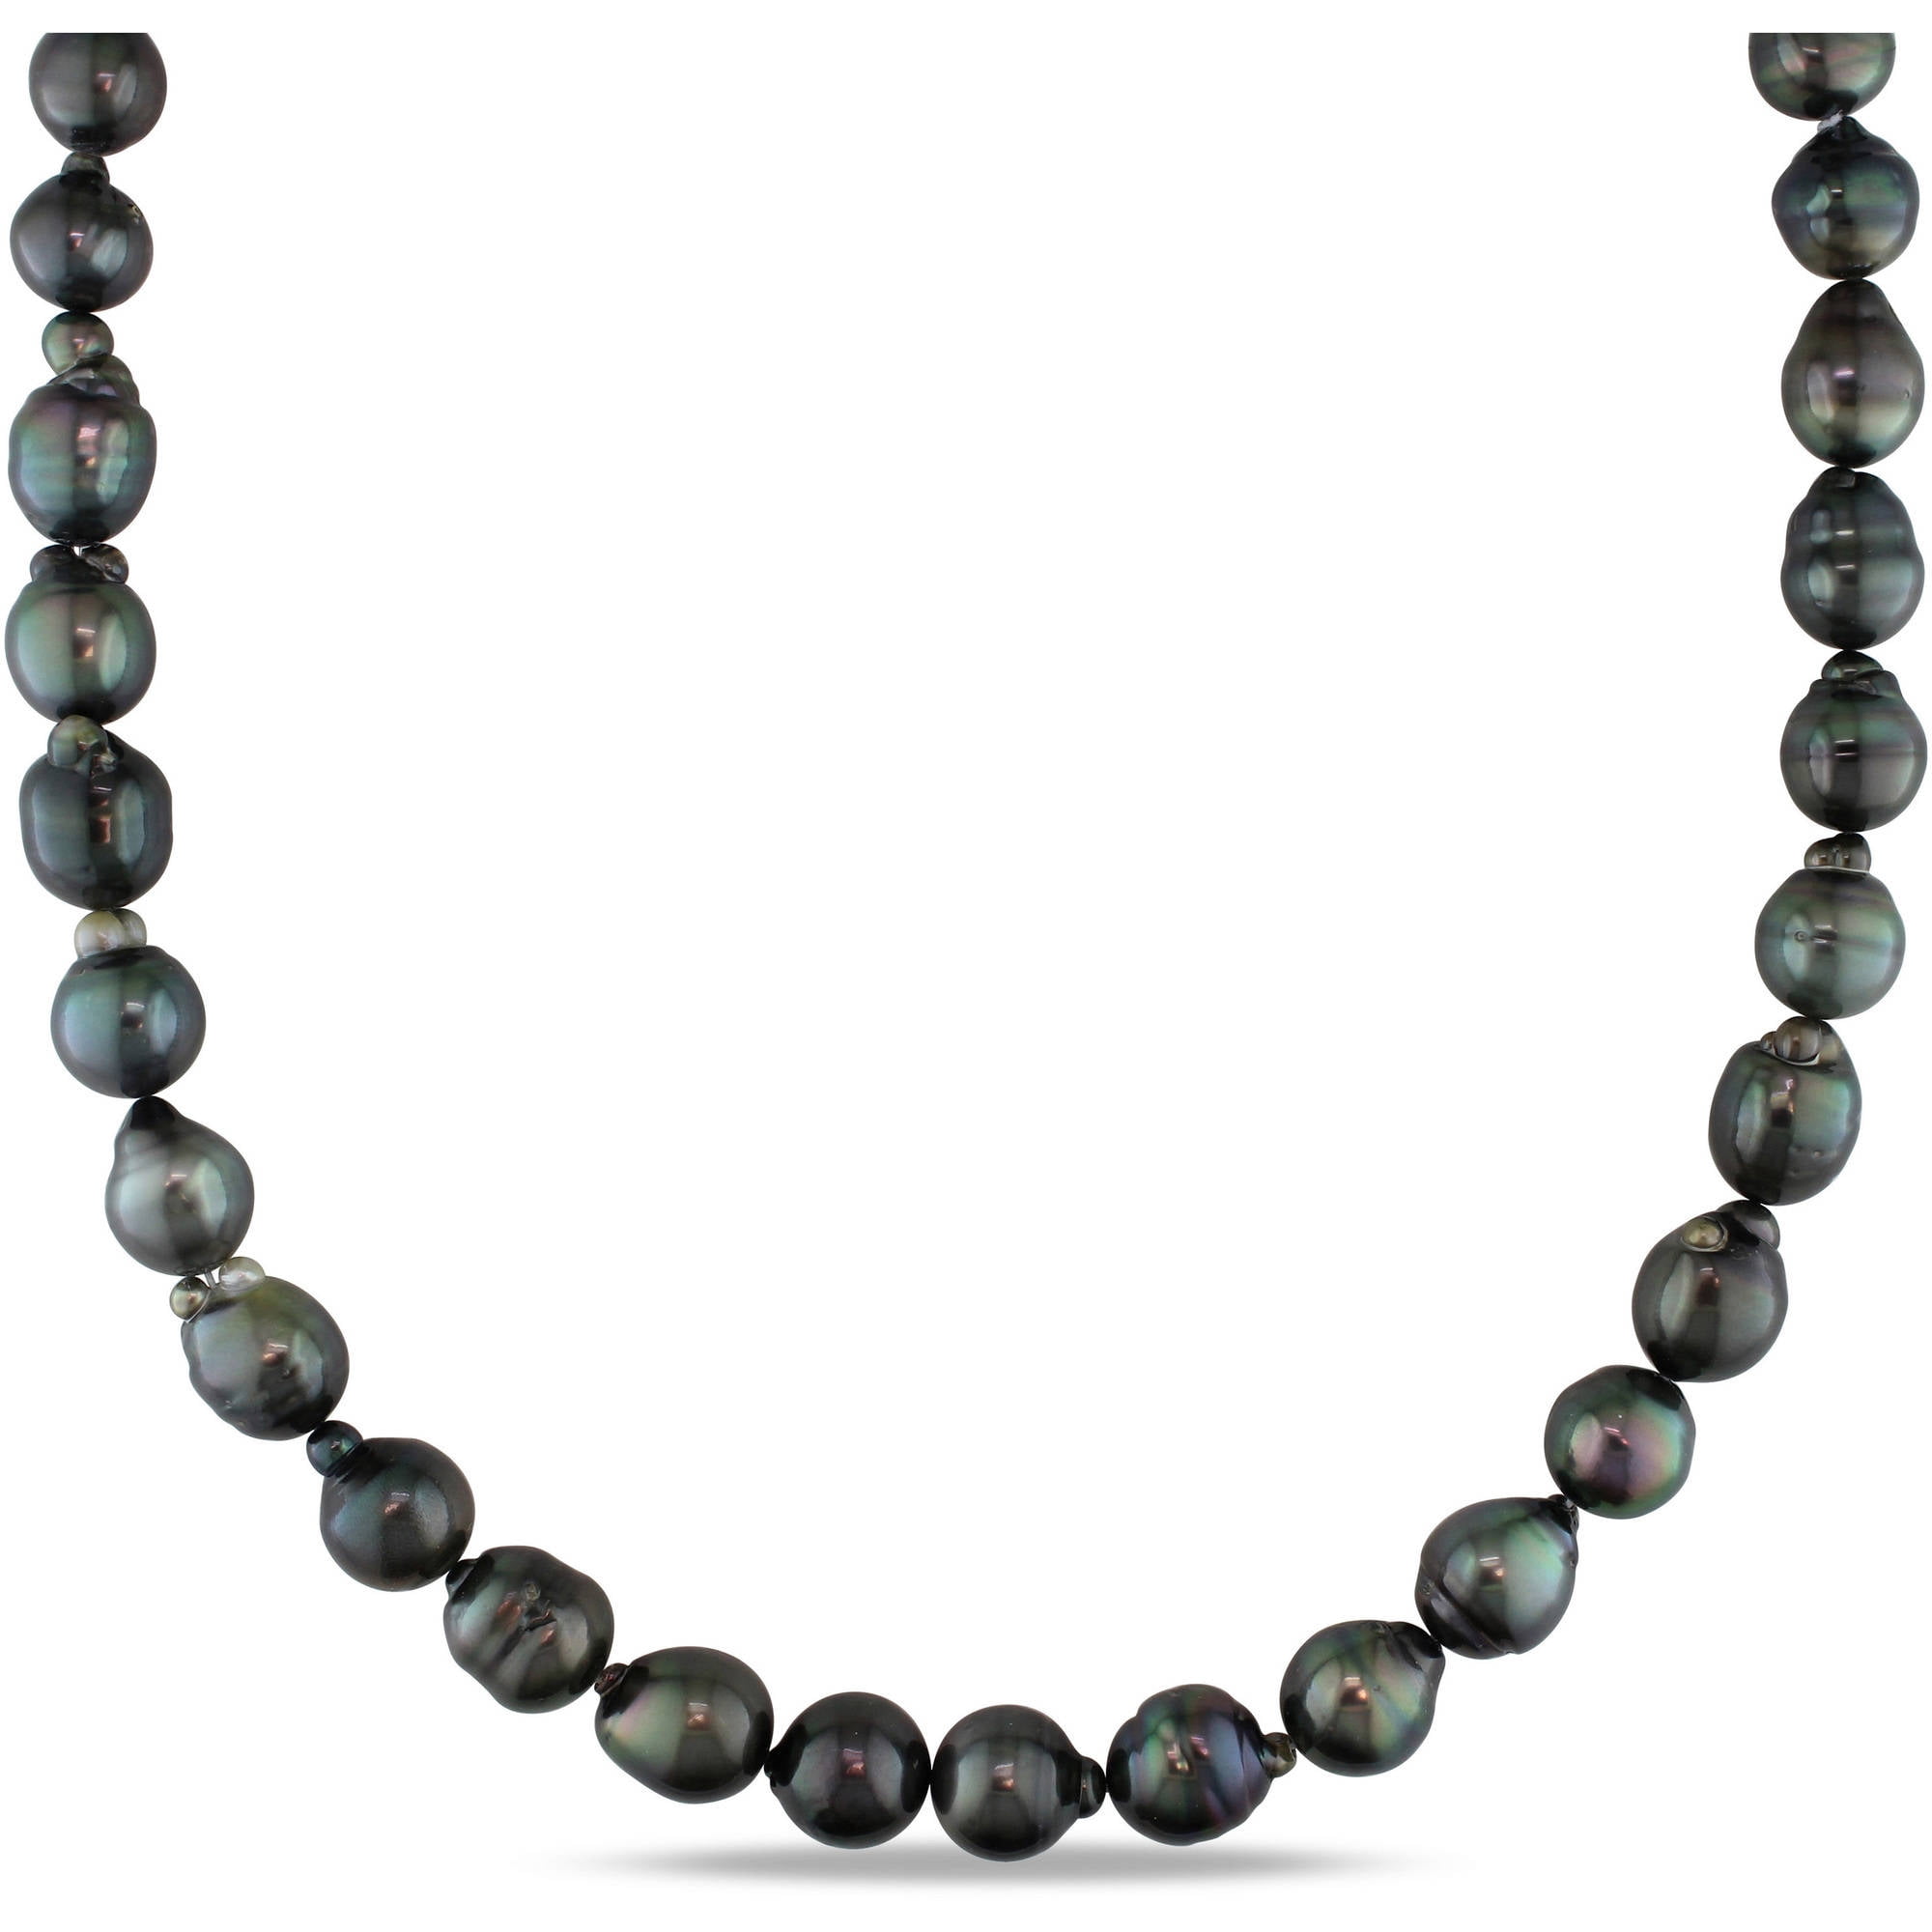 Classy 18 Inch Double Layer Black Pearl Necklace Set - Pure Pearls